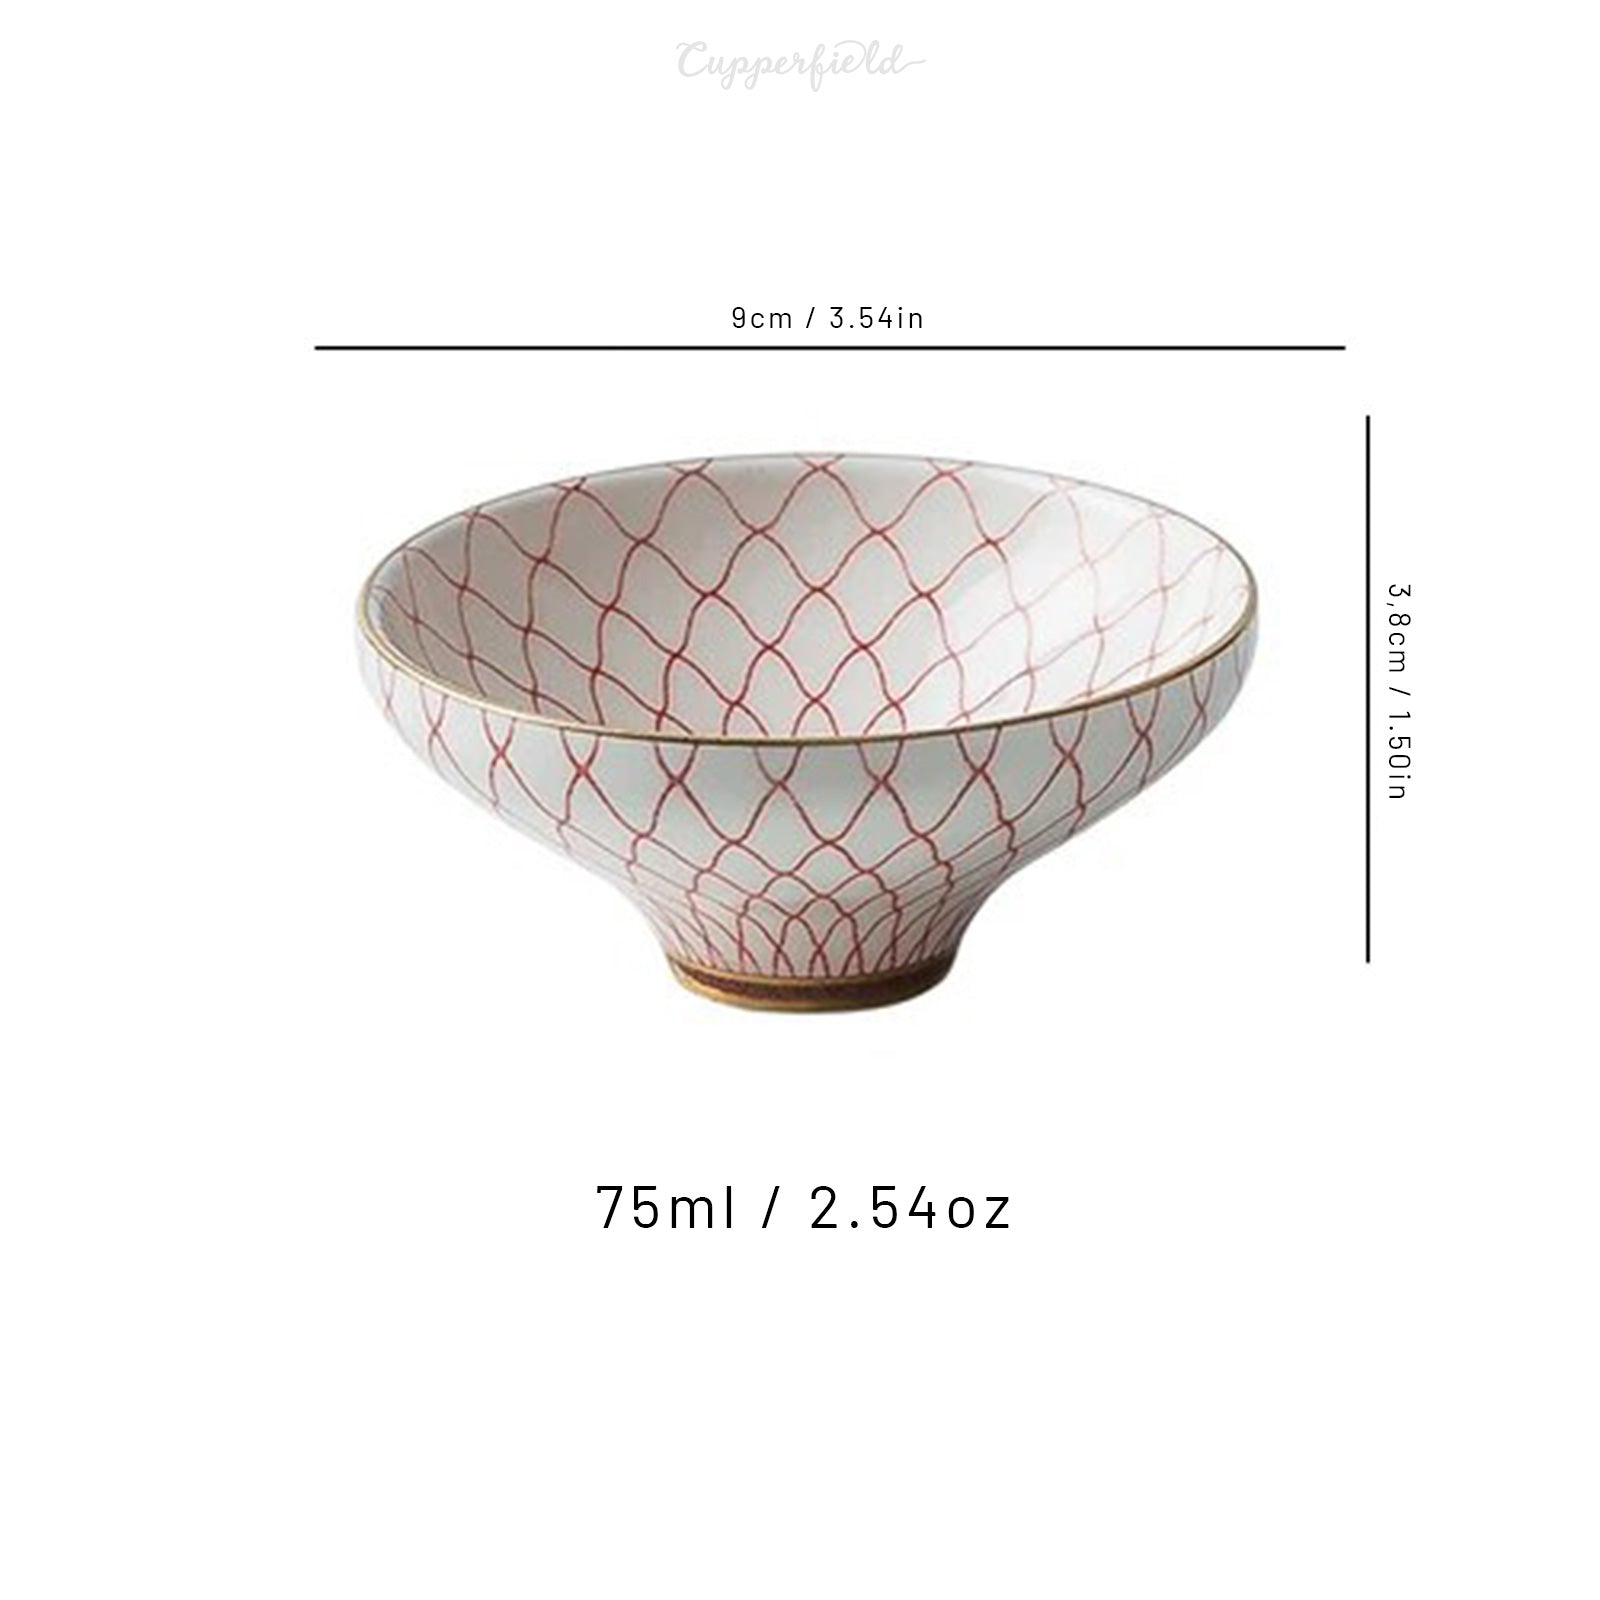 Modern Ceramic Bowls: Infuse Style into Every Meal